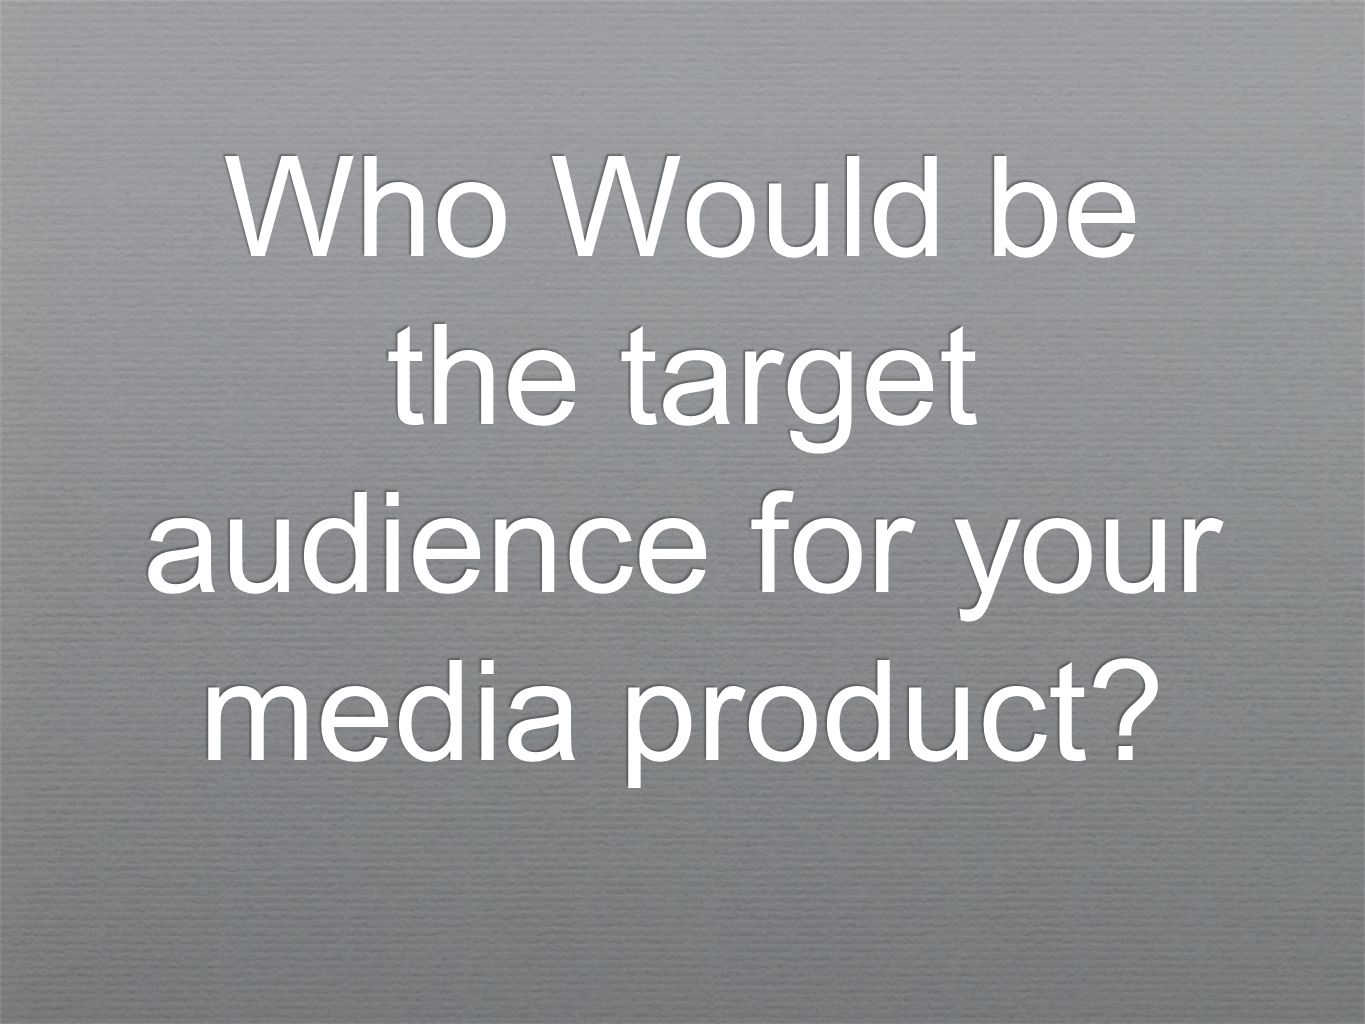 Who Would be the target audience for your media product